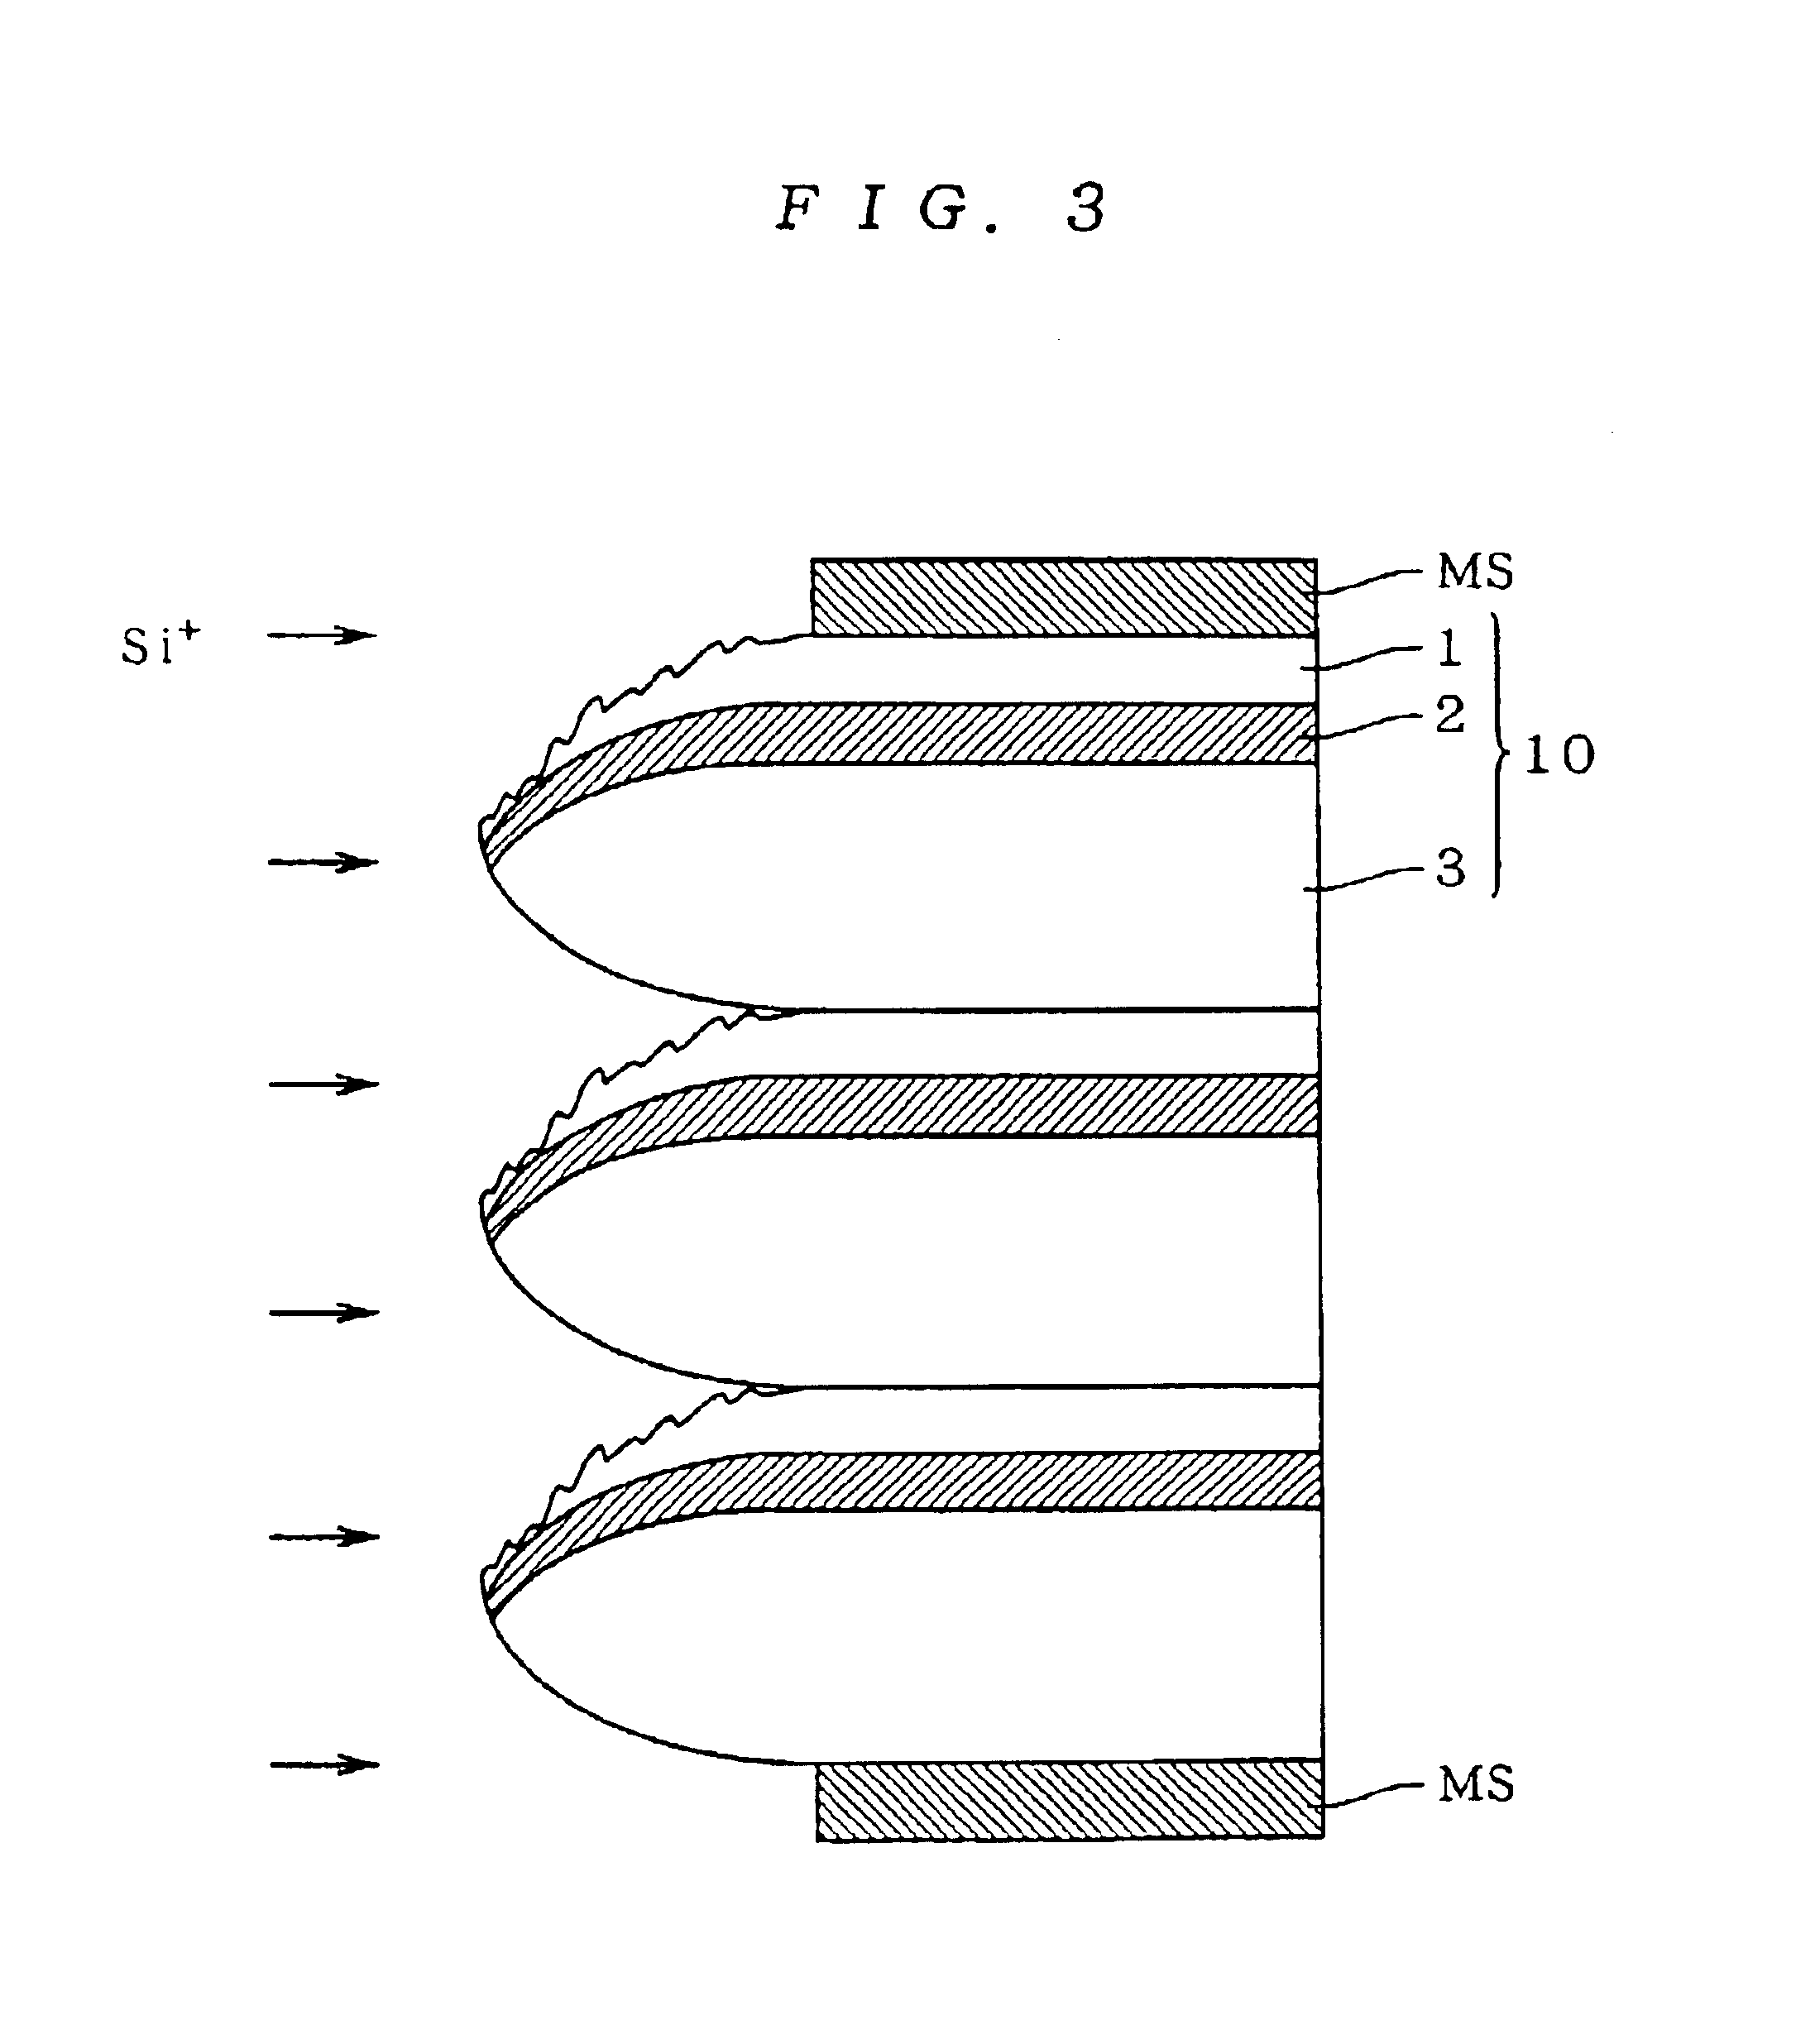 Semiconductor substrate with stacked oxide and SOI layers with a molten or epitaxial layer formed on an edge of the stacked layers